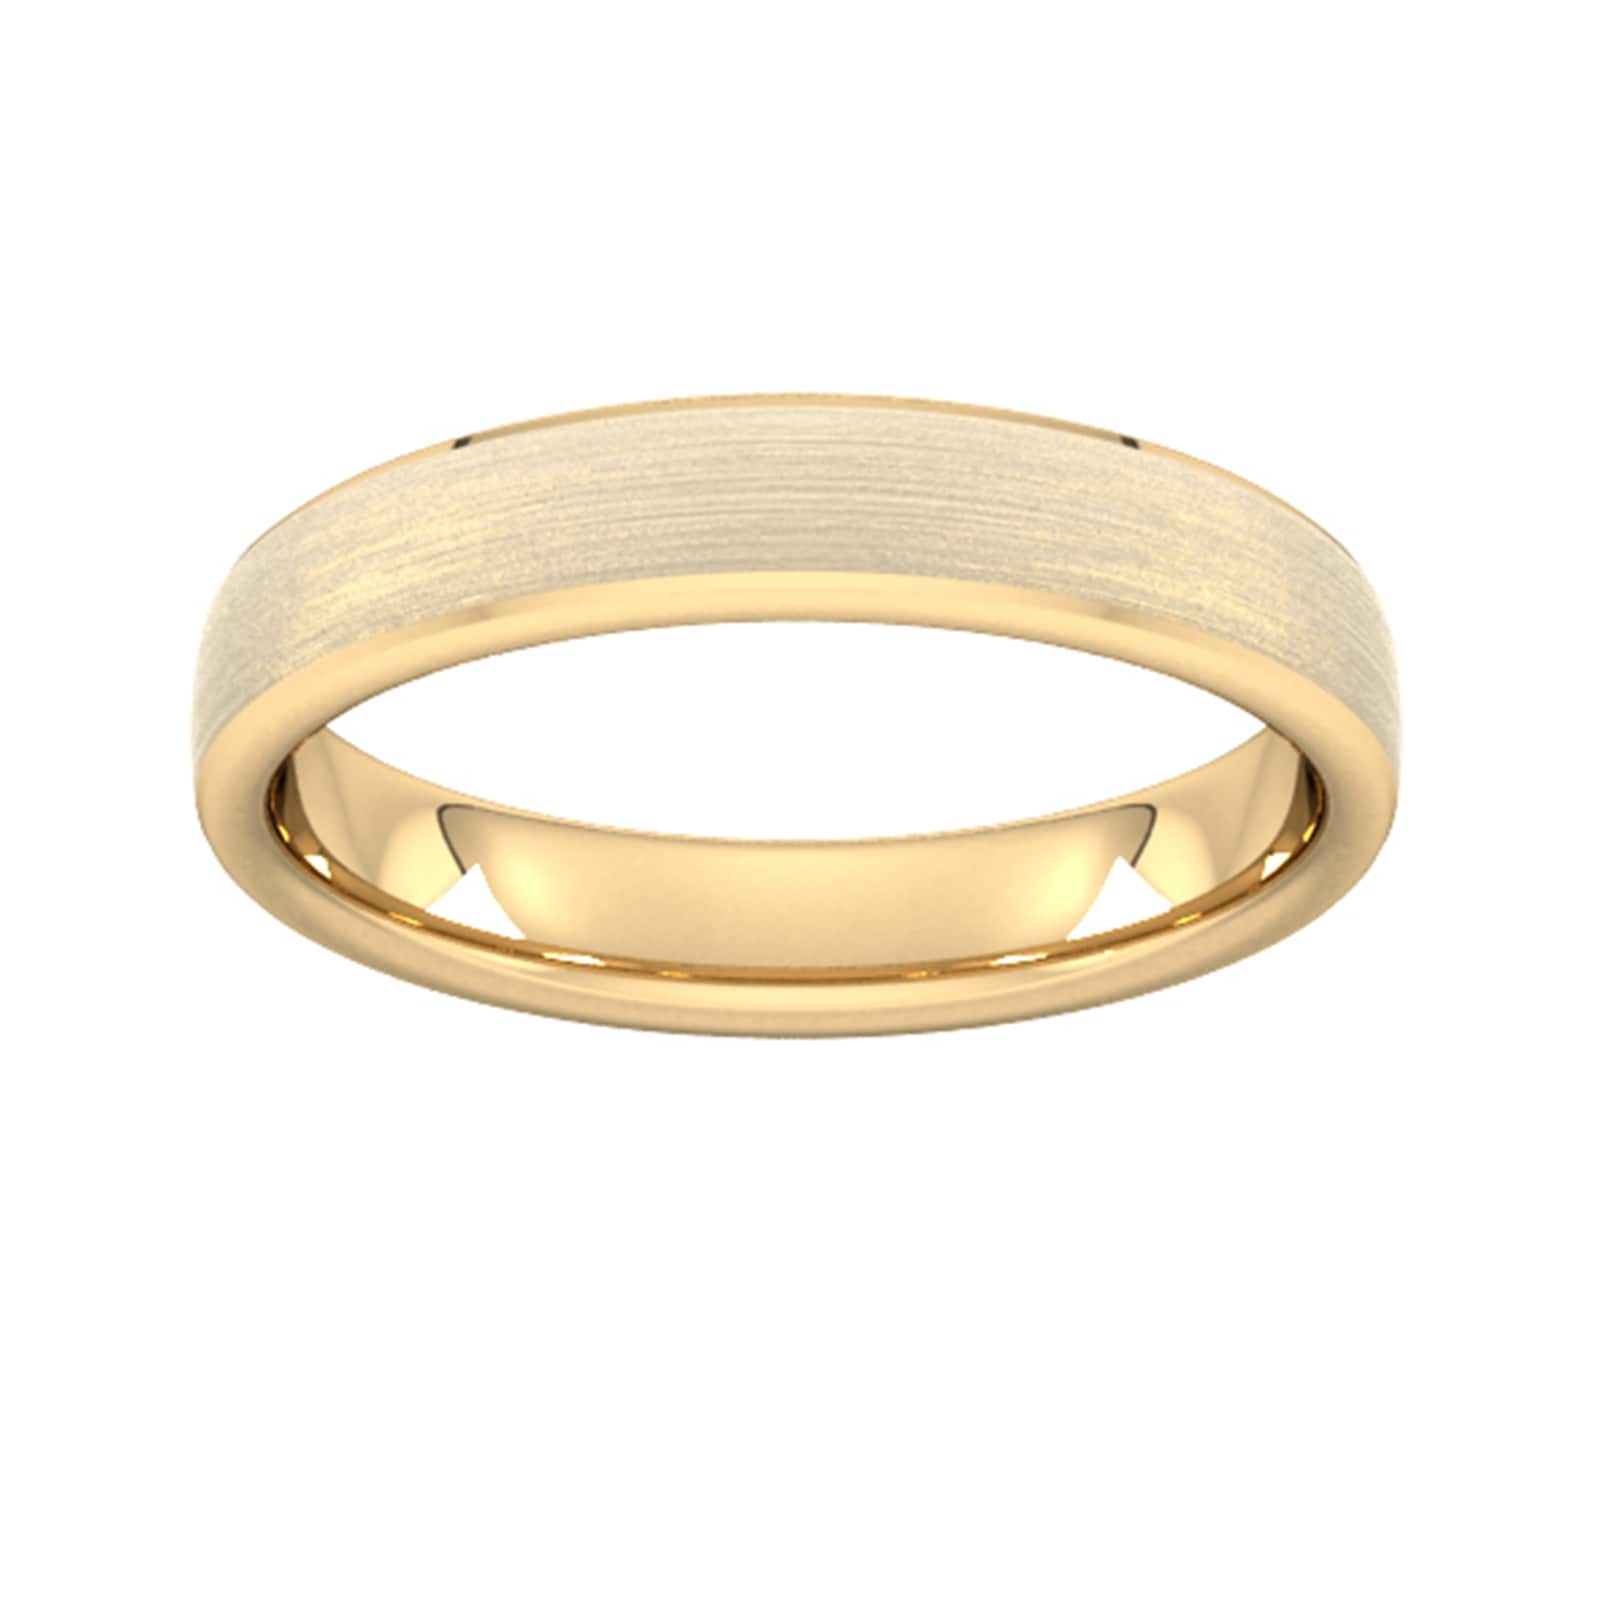 4mm Traditional Court Standard Polished Chamfered Edges With Matt Centre Wedding Ring In 18 Carat Yellow Gold - Ring Size J